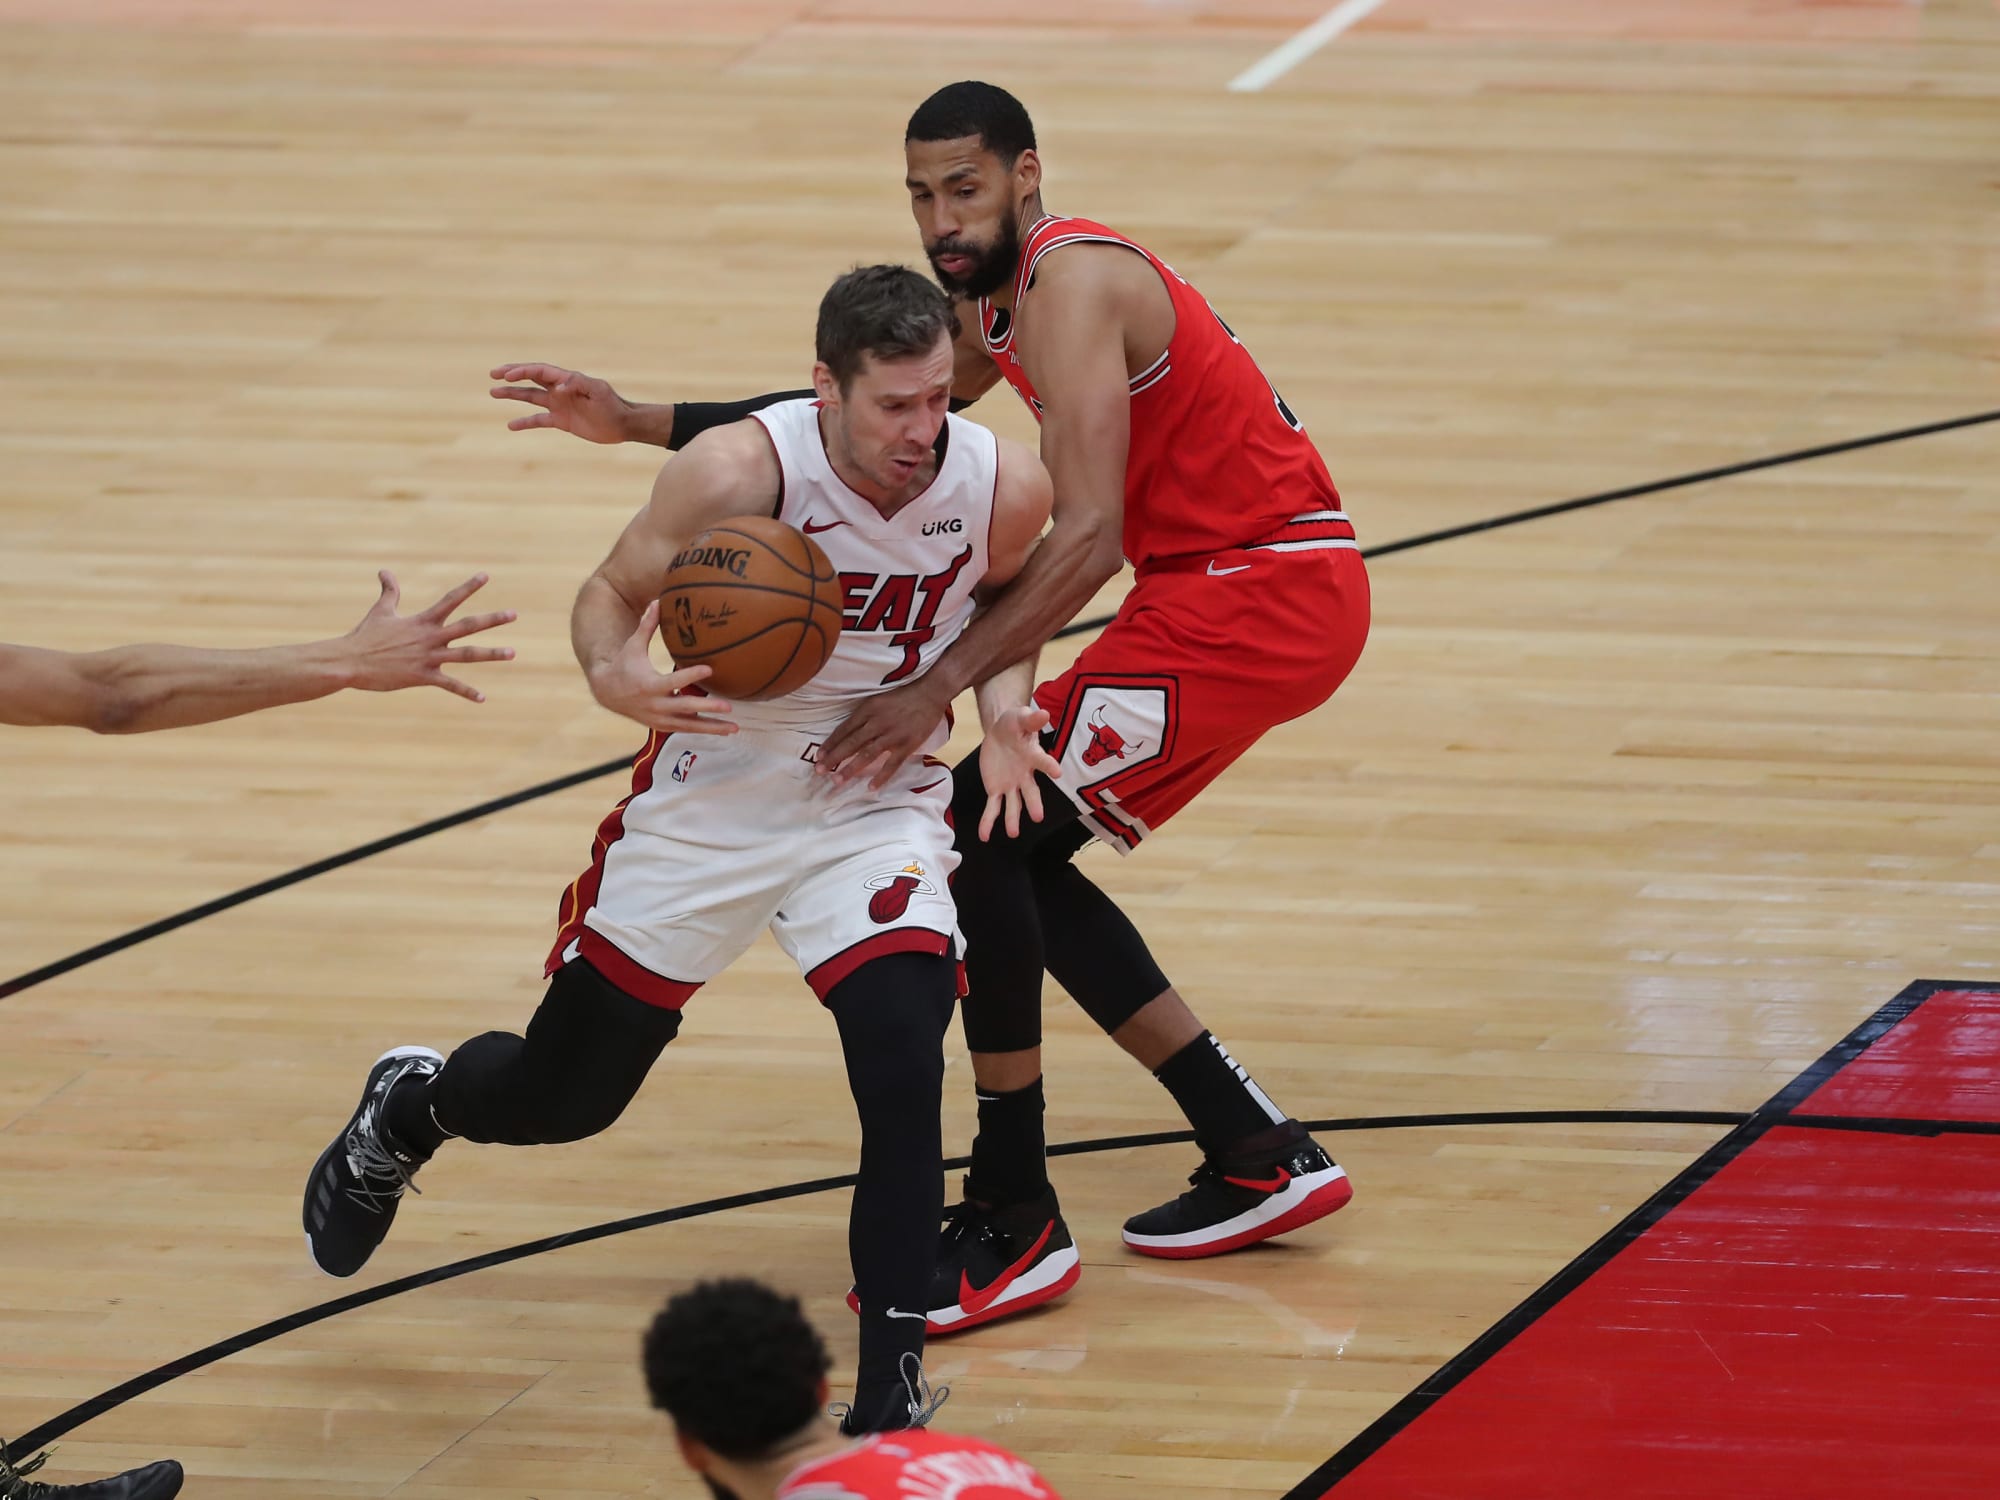 Chicago Bulls: Garrett Temple out vs. Raptors with ankle injury